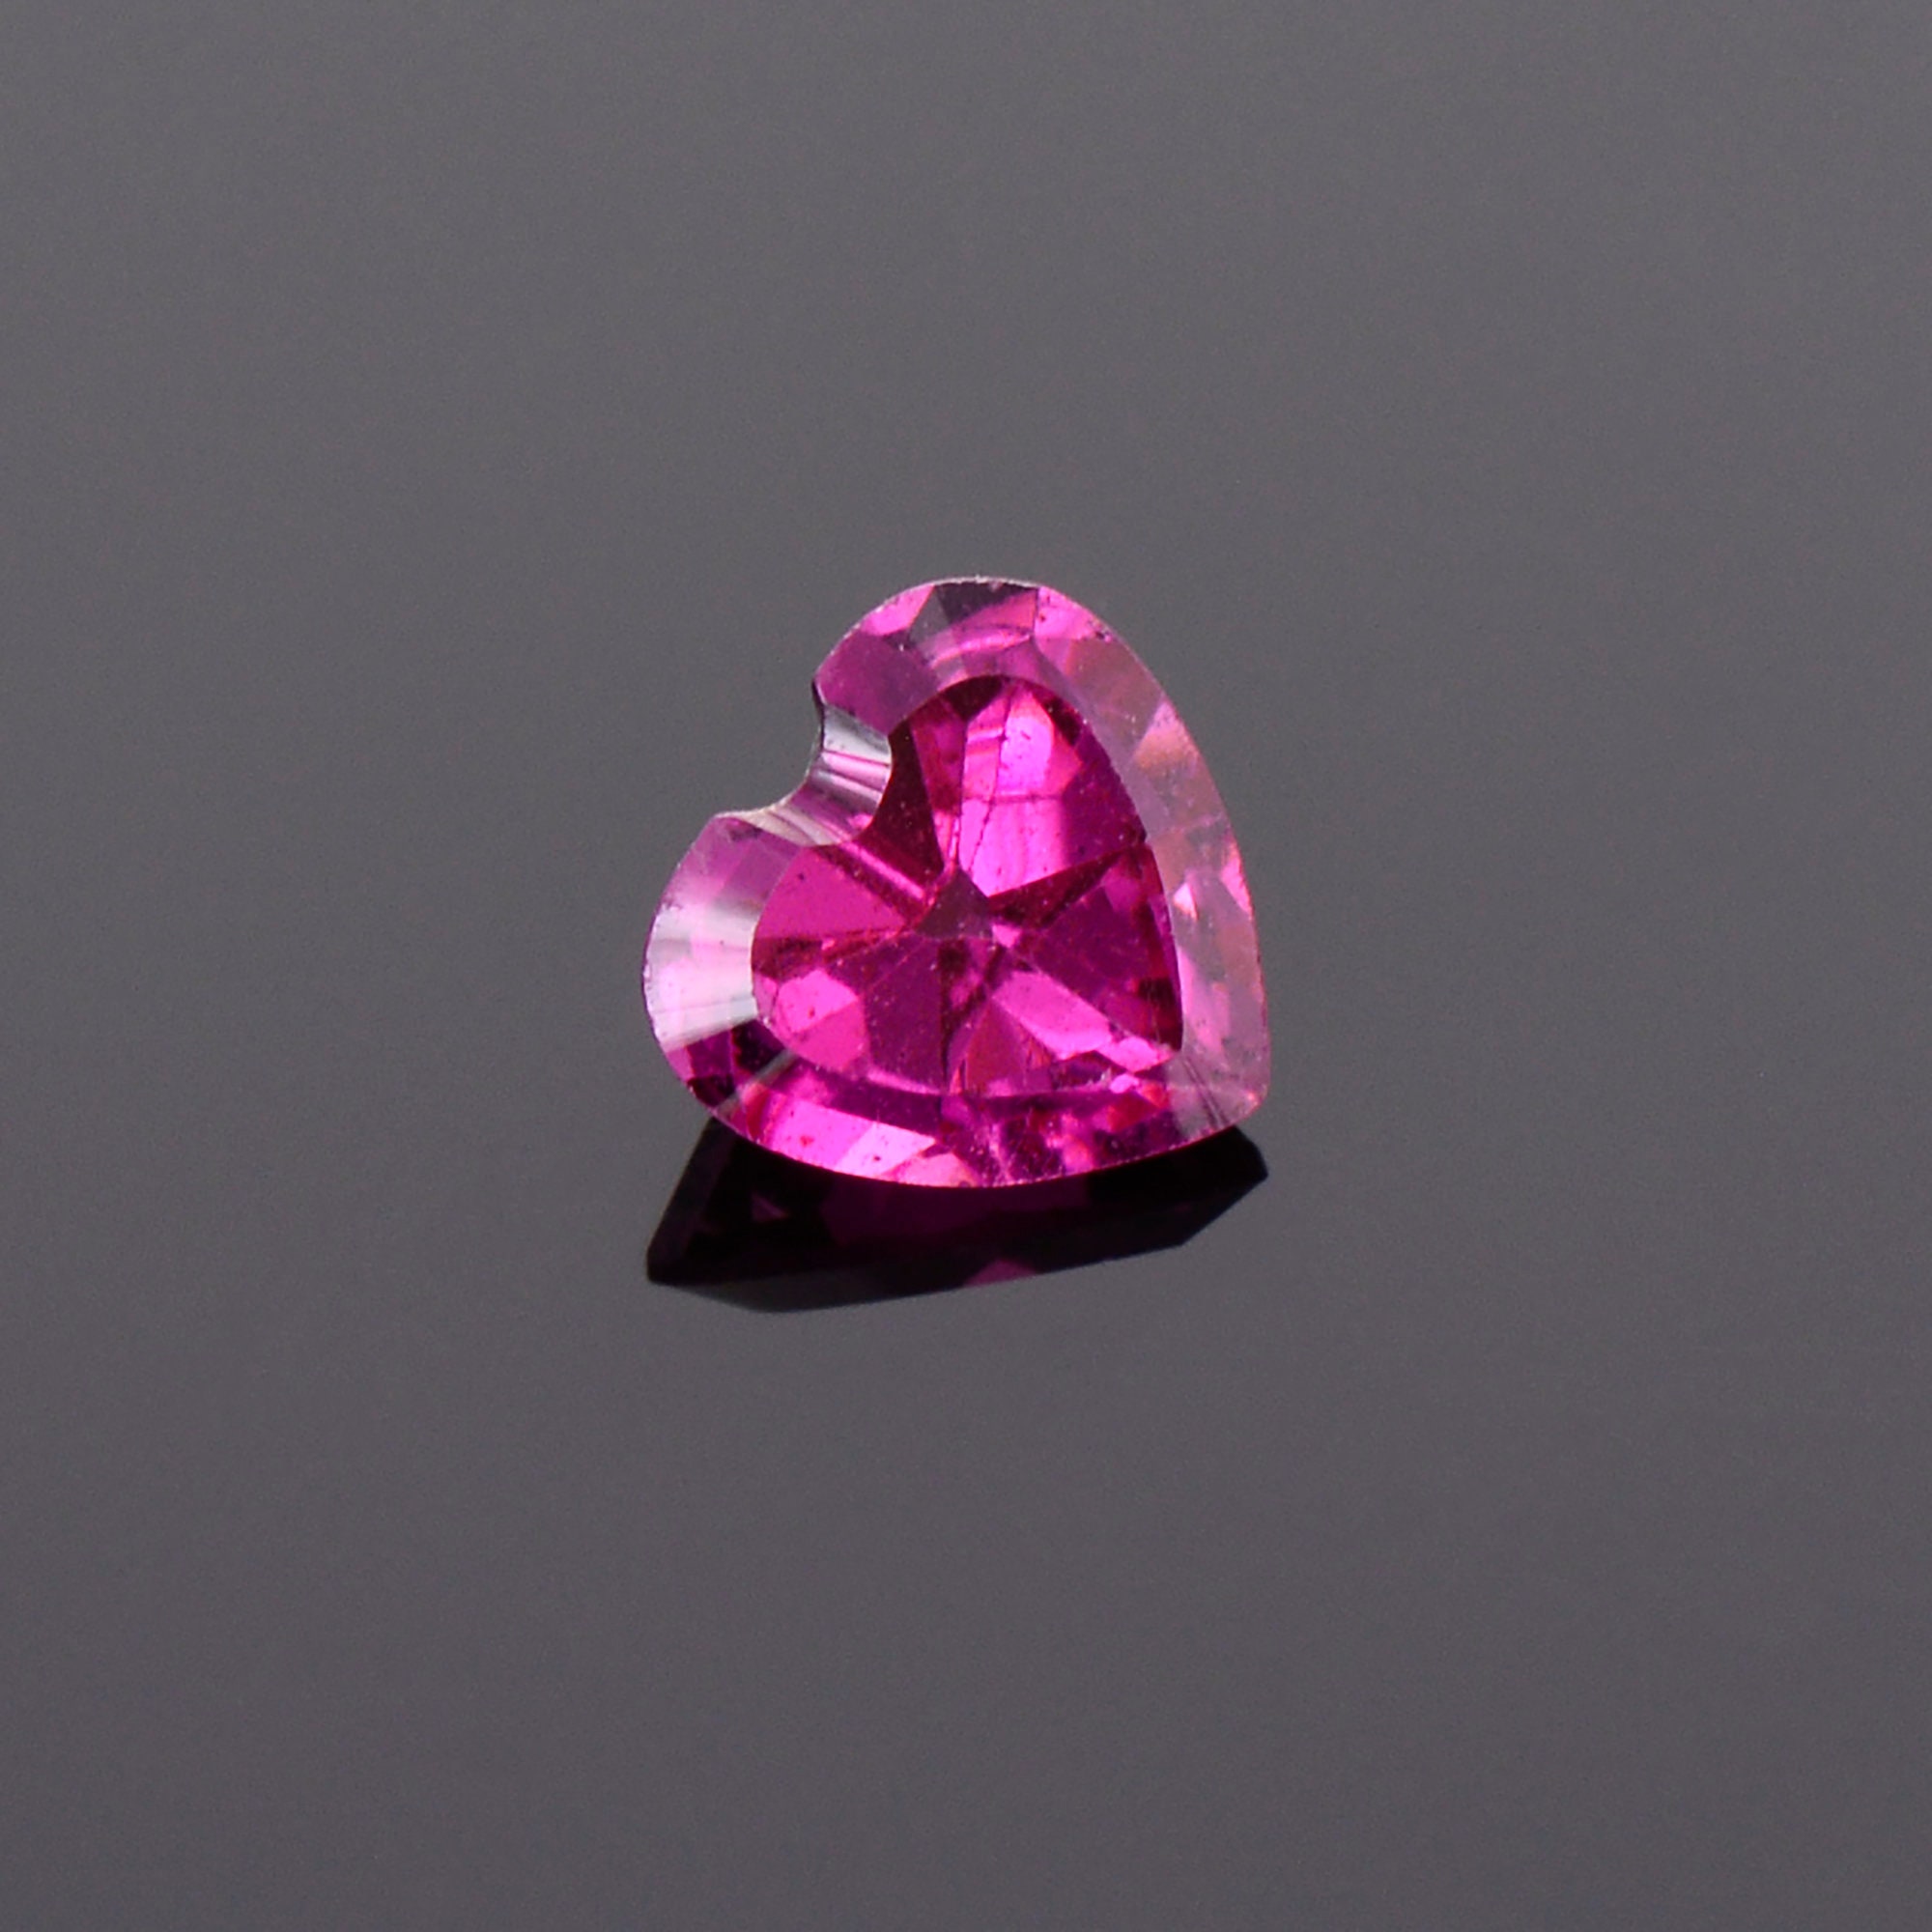 25% OFF SALE! Gorgeous Hot Pink Spinel Gemstone from Tanzania, 0.96 cts ...